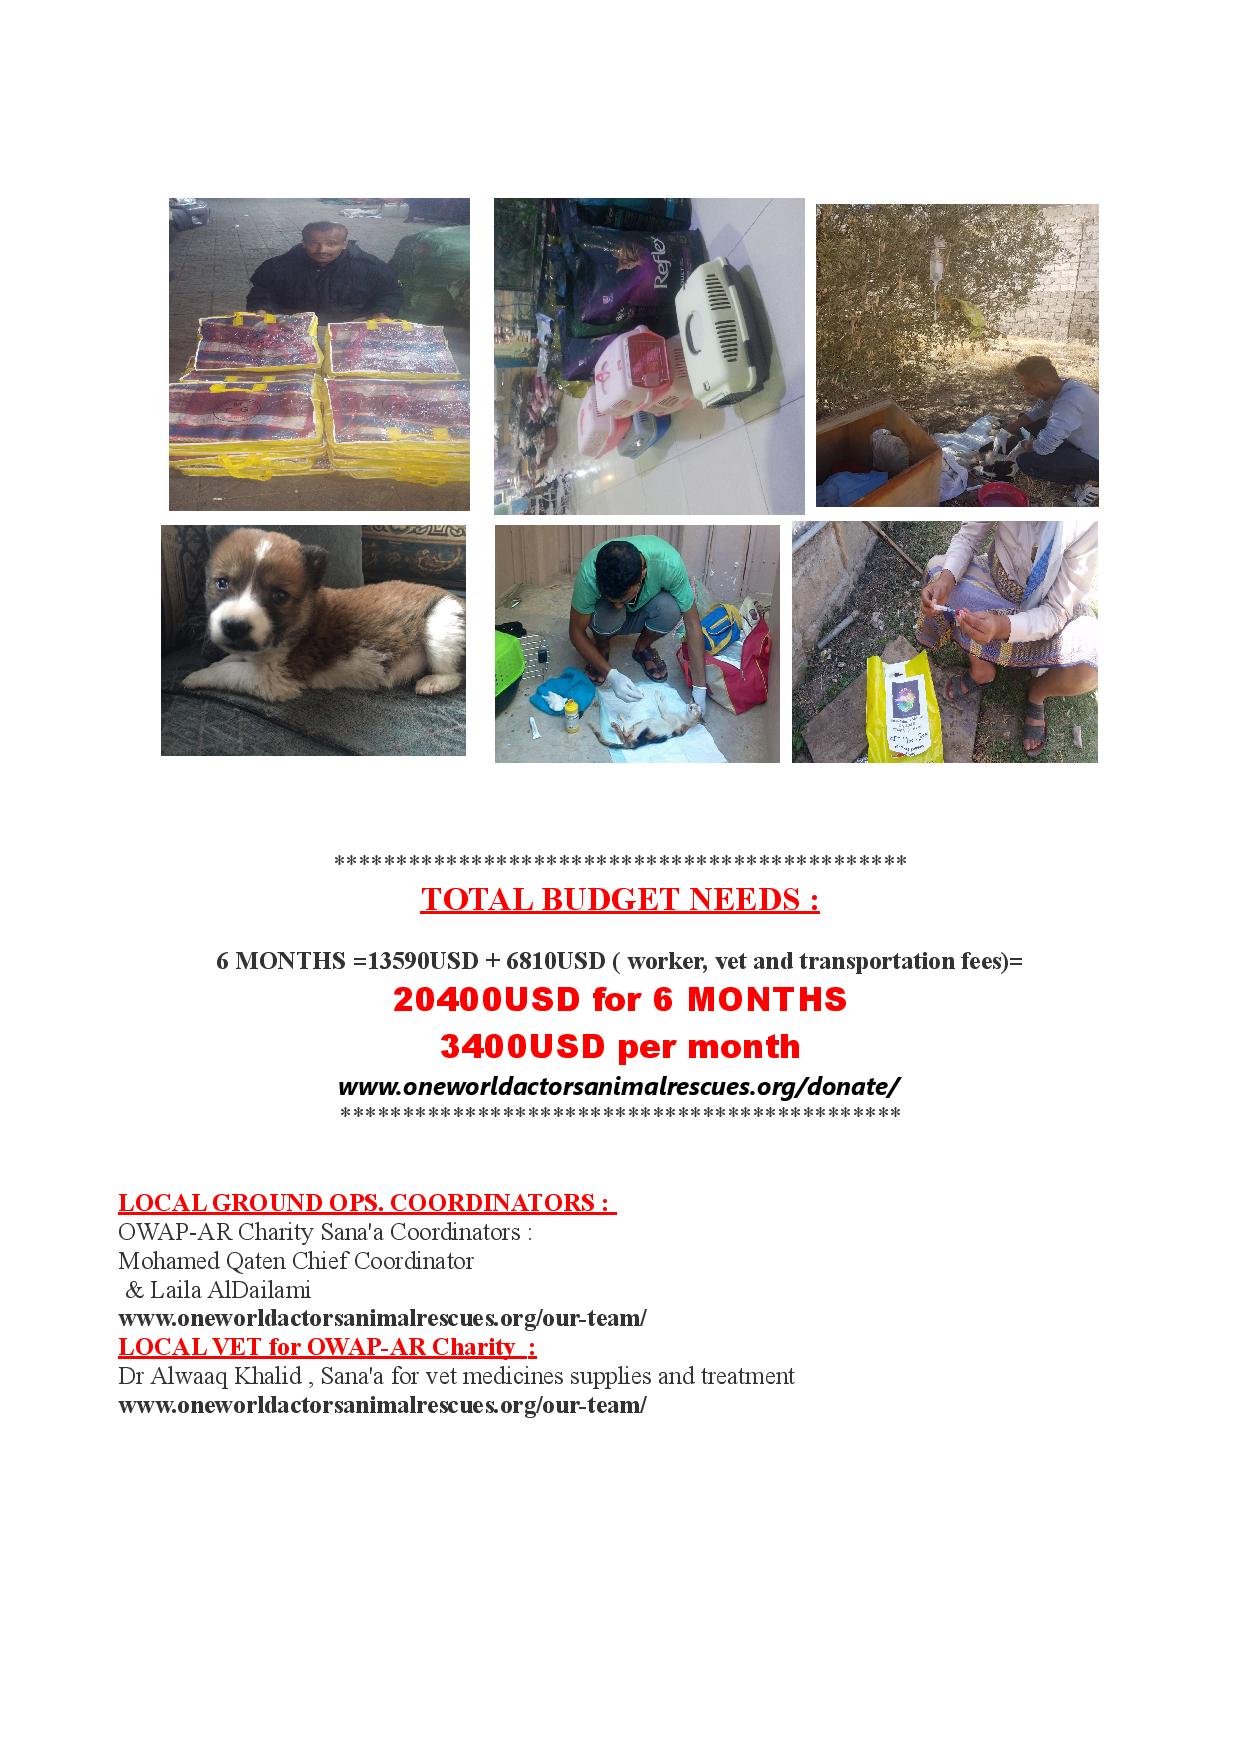 Stray Proposal OWAP-AR  21 July 2019 Rescue , Shelter, neutervaccinate Release Public Health and Saftey Mission Sana a Yemen by OWAP-AR-page-004.jpg